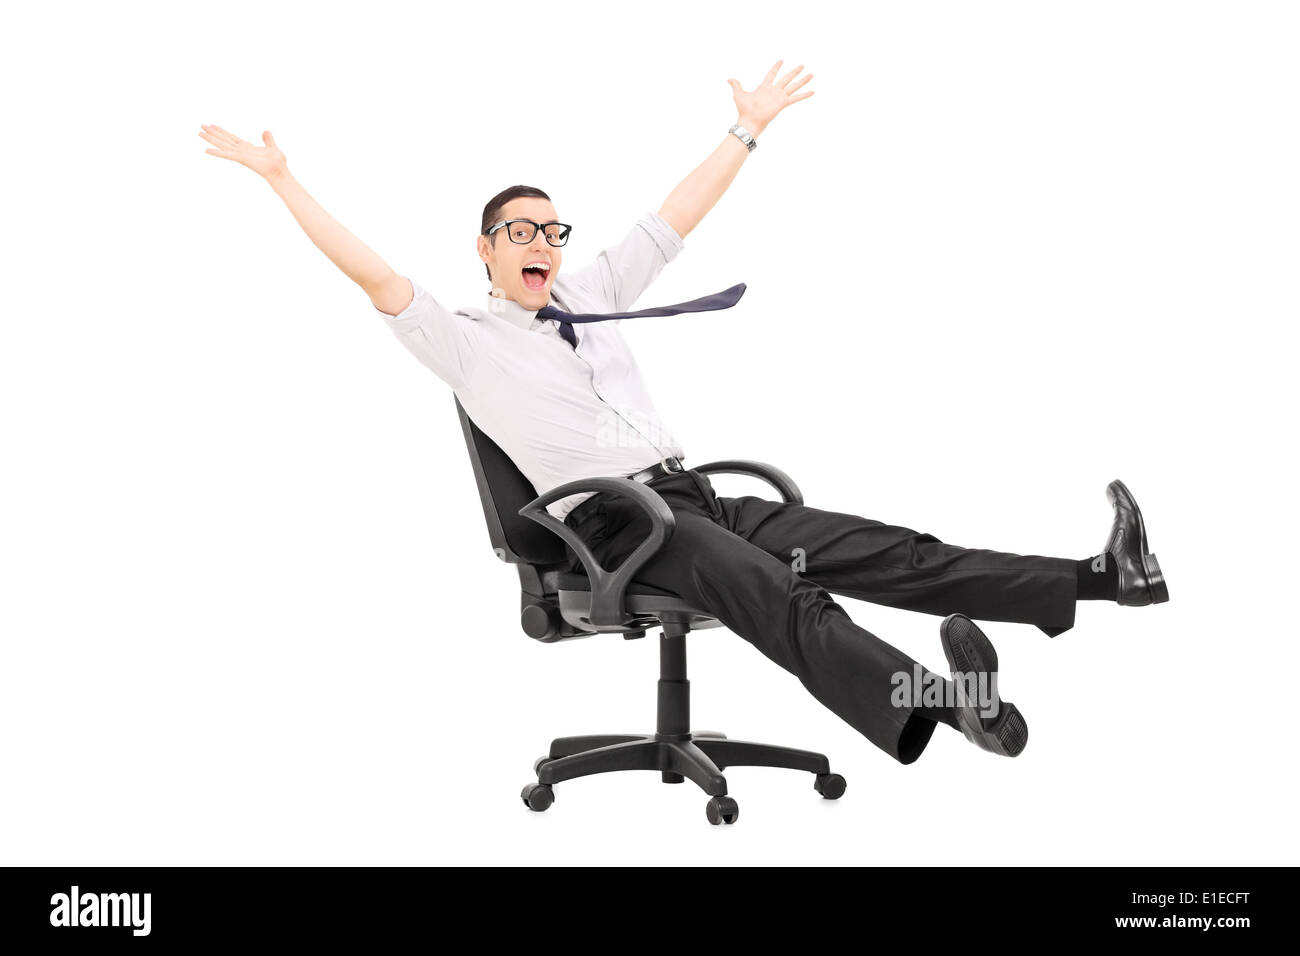 Man riding in an office chair and gesturing joy Stock Photo